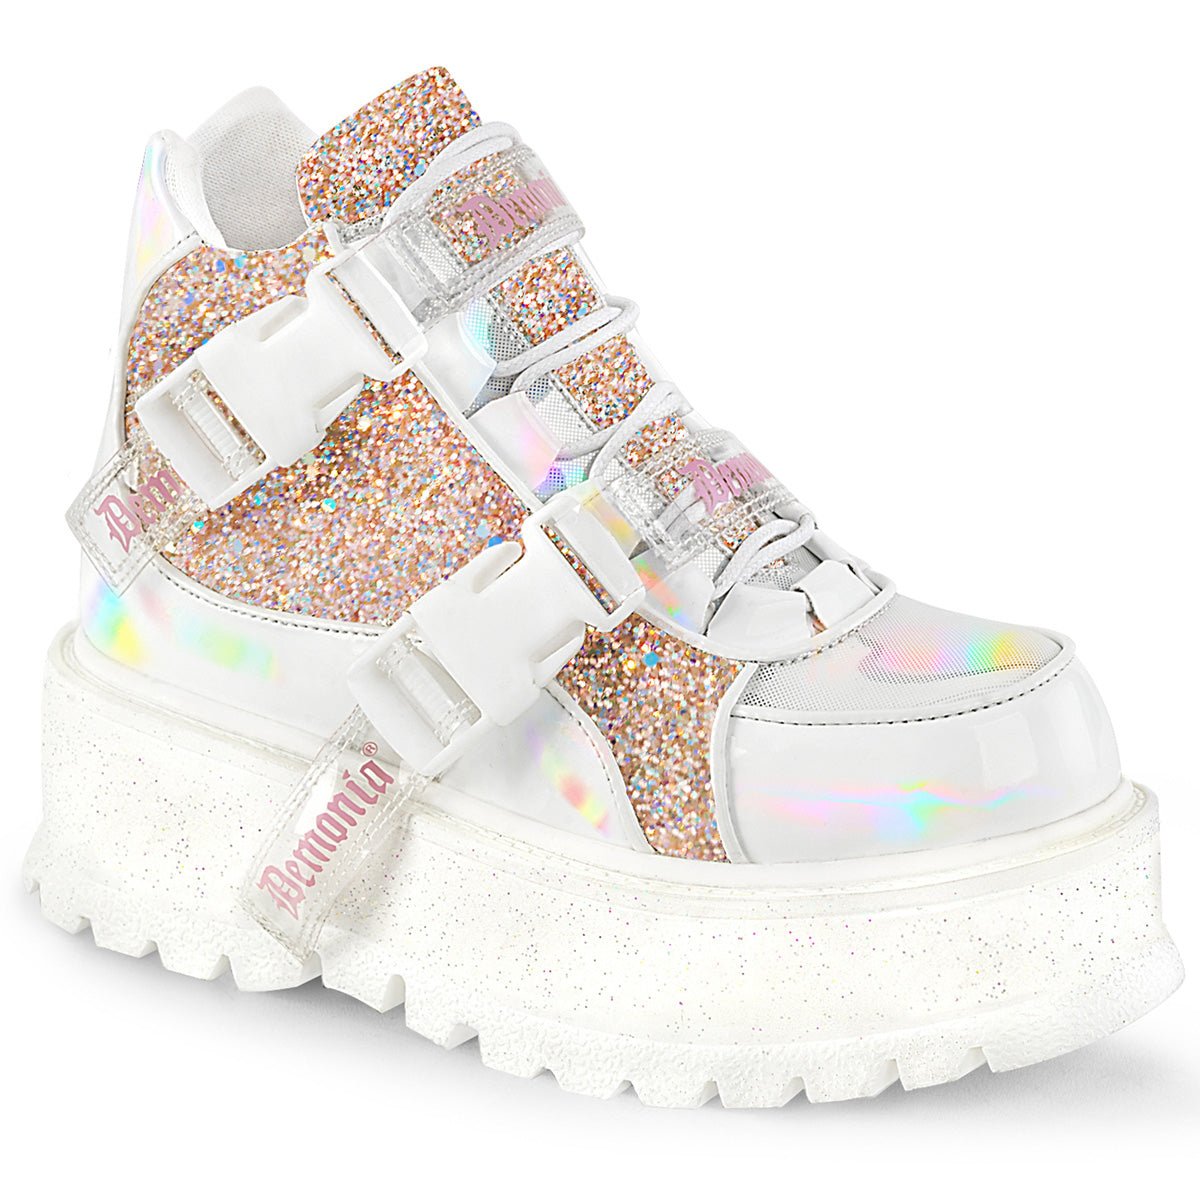 Too Fast | Demonia Slacker 50 | White & Baby Pink Holographic Patent Leather & Glitter Women's Ankle Boots